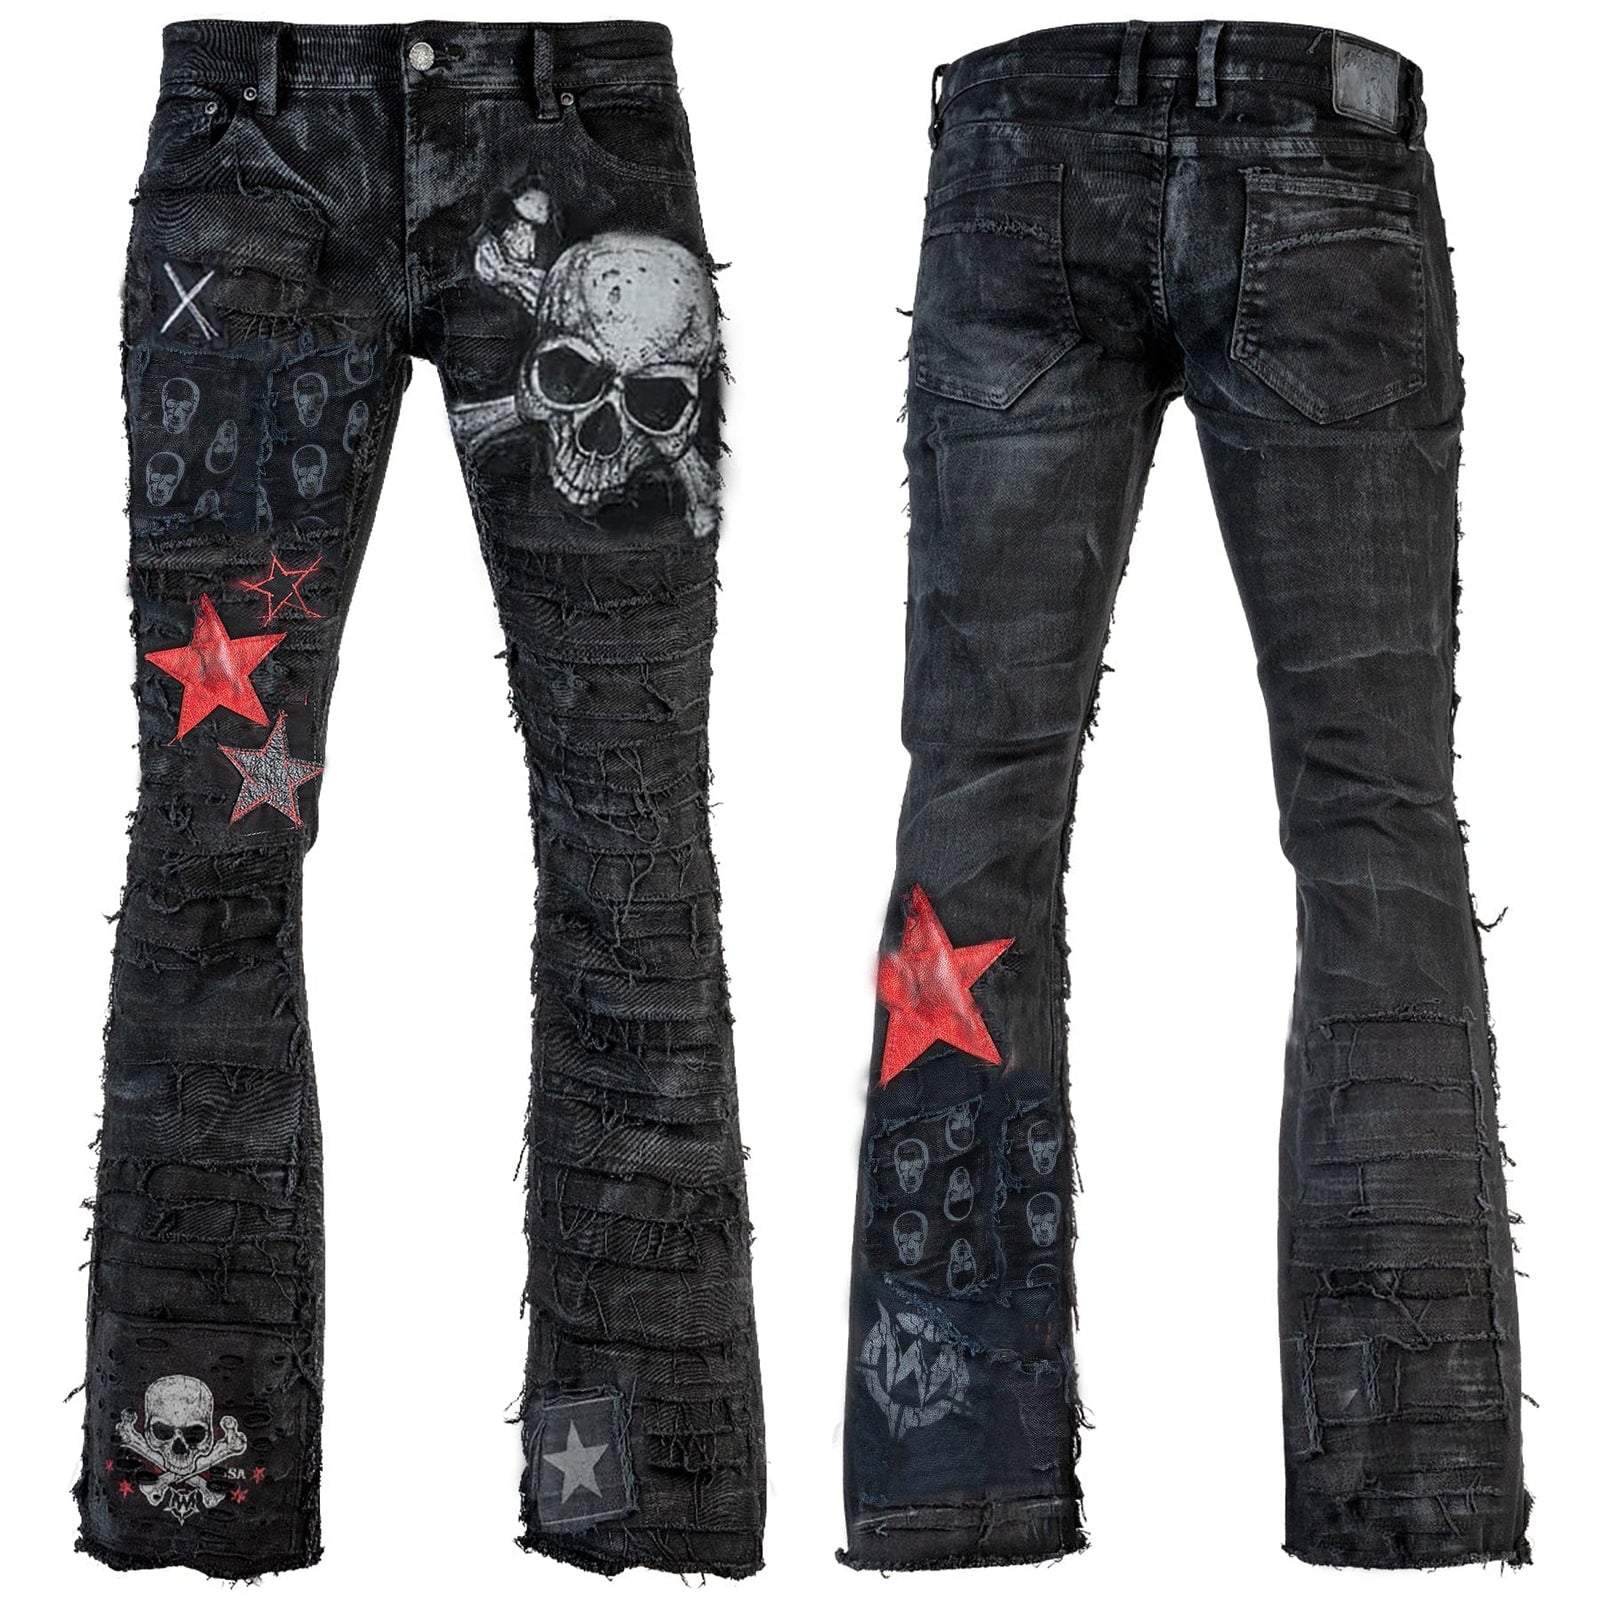 Rockstar Pants Denim - Darkstore - Order gothic fashion online or buy  directly in our shop in Berlin